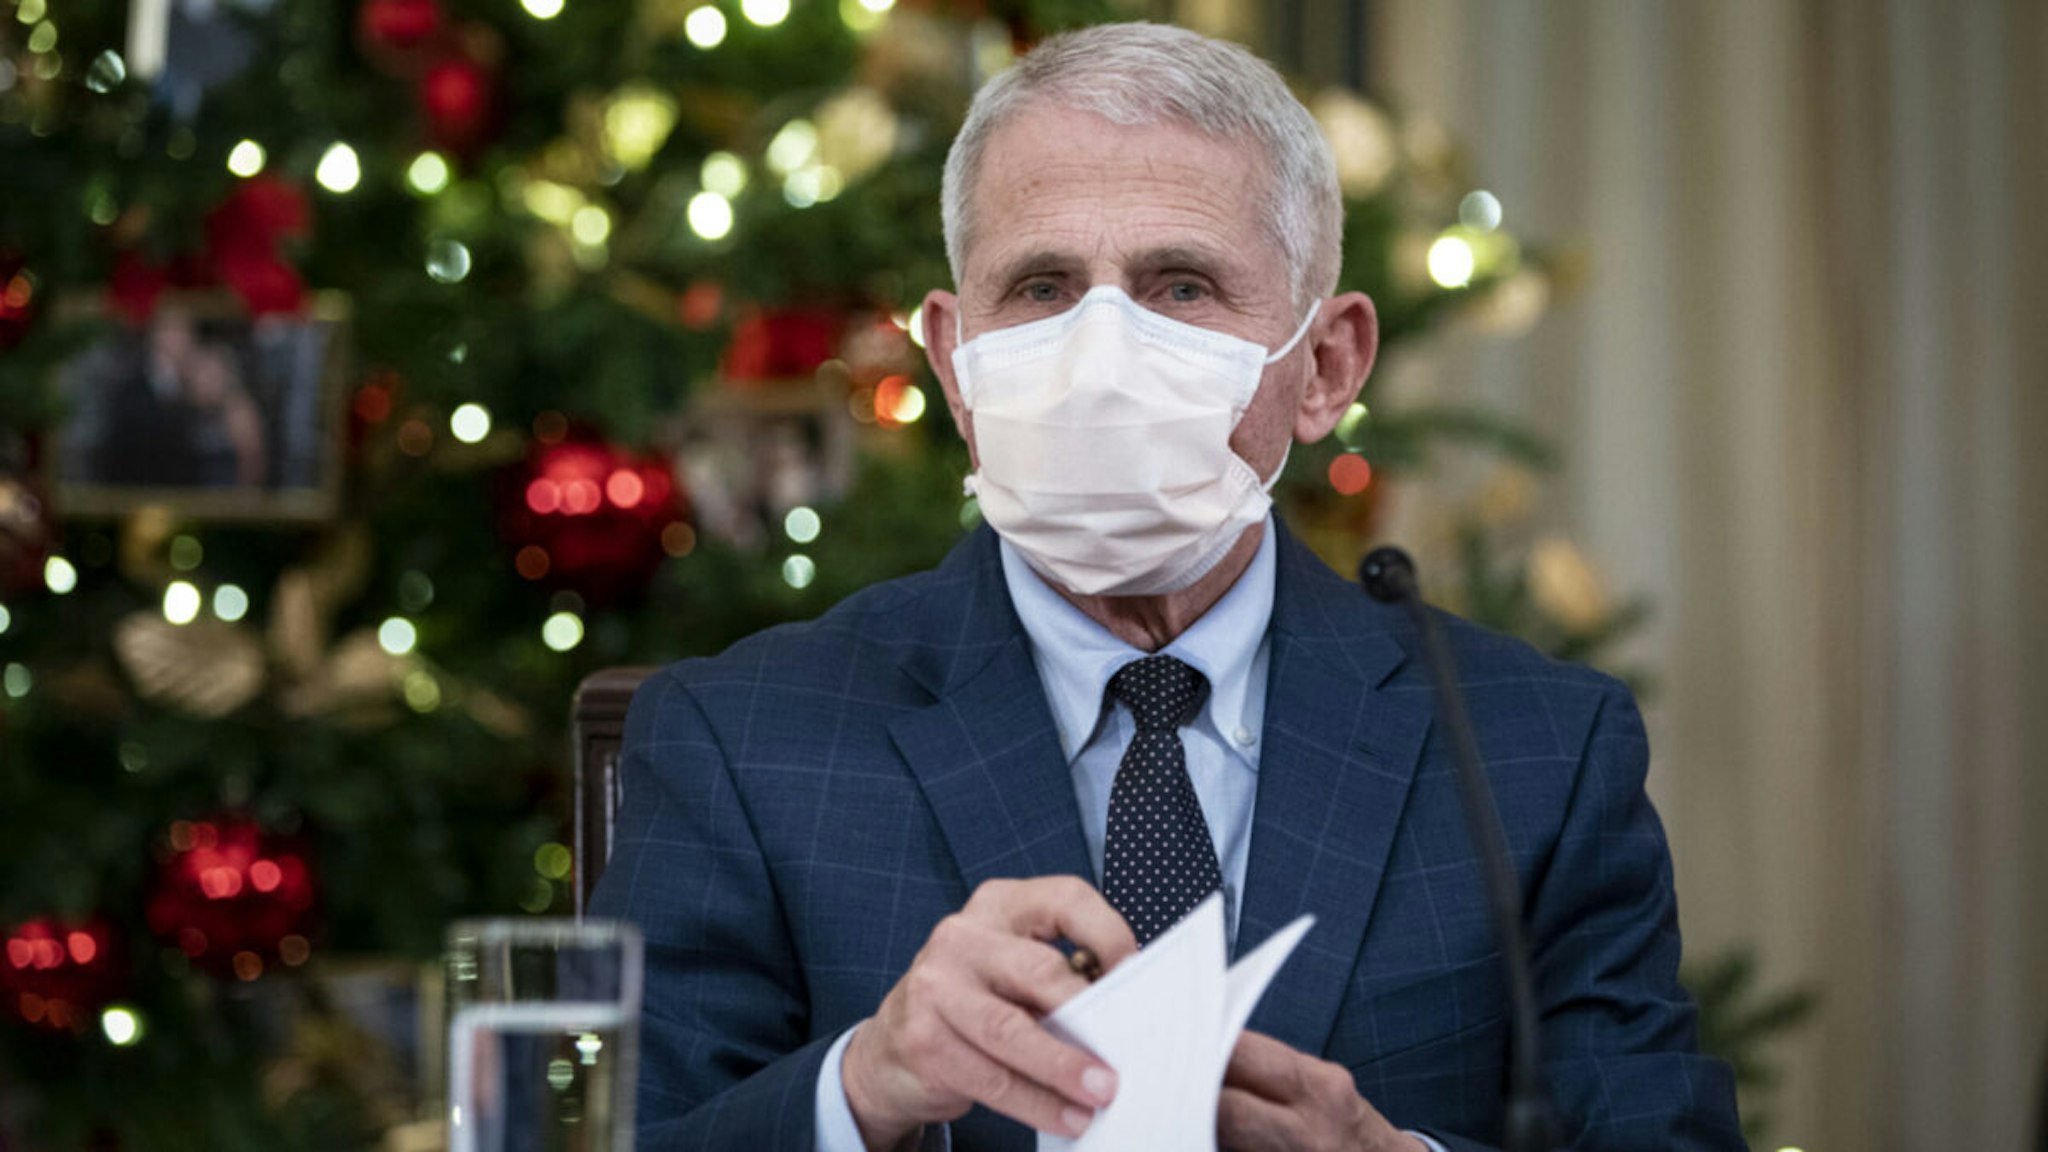 Anthony Fauci, director of the National Institute of Allergy and Infectious Diseases, during a meeting with U.S. President Joe Biden and members of the White House Covid-19 Response Team on the Omicron variant in the State Dining Room of the White House in Washington, D.C., U.S., on Thursday, Dec. 9, 2021.